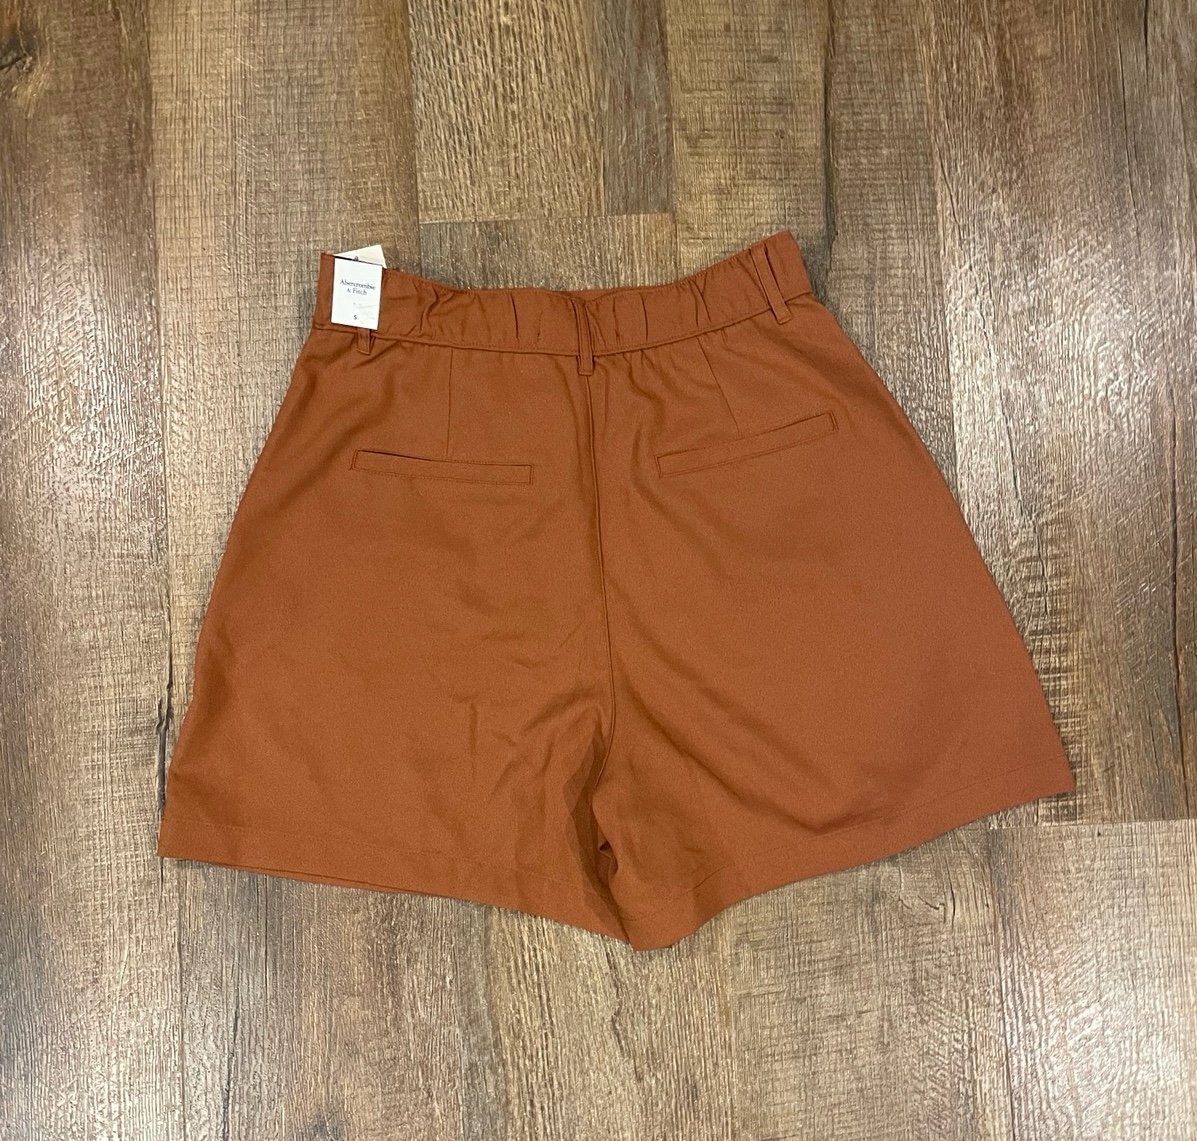 high discount Abercrombie & Fitch Dressy Tailored Shorts MWVKNJ34T Discount